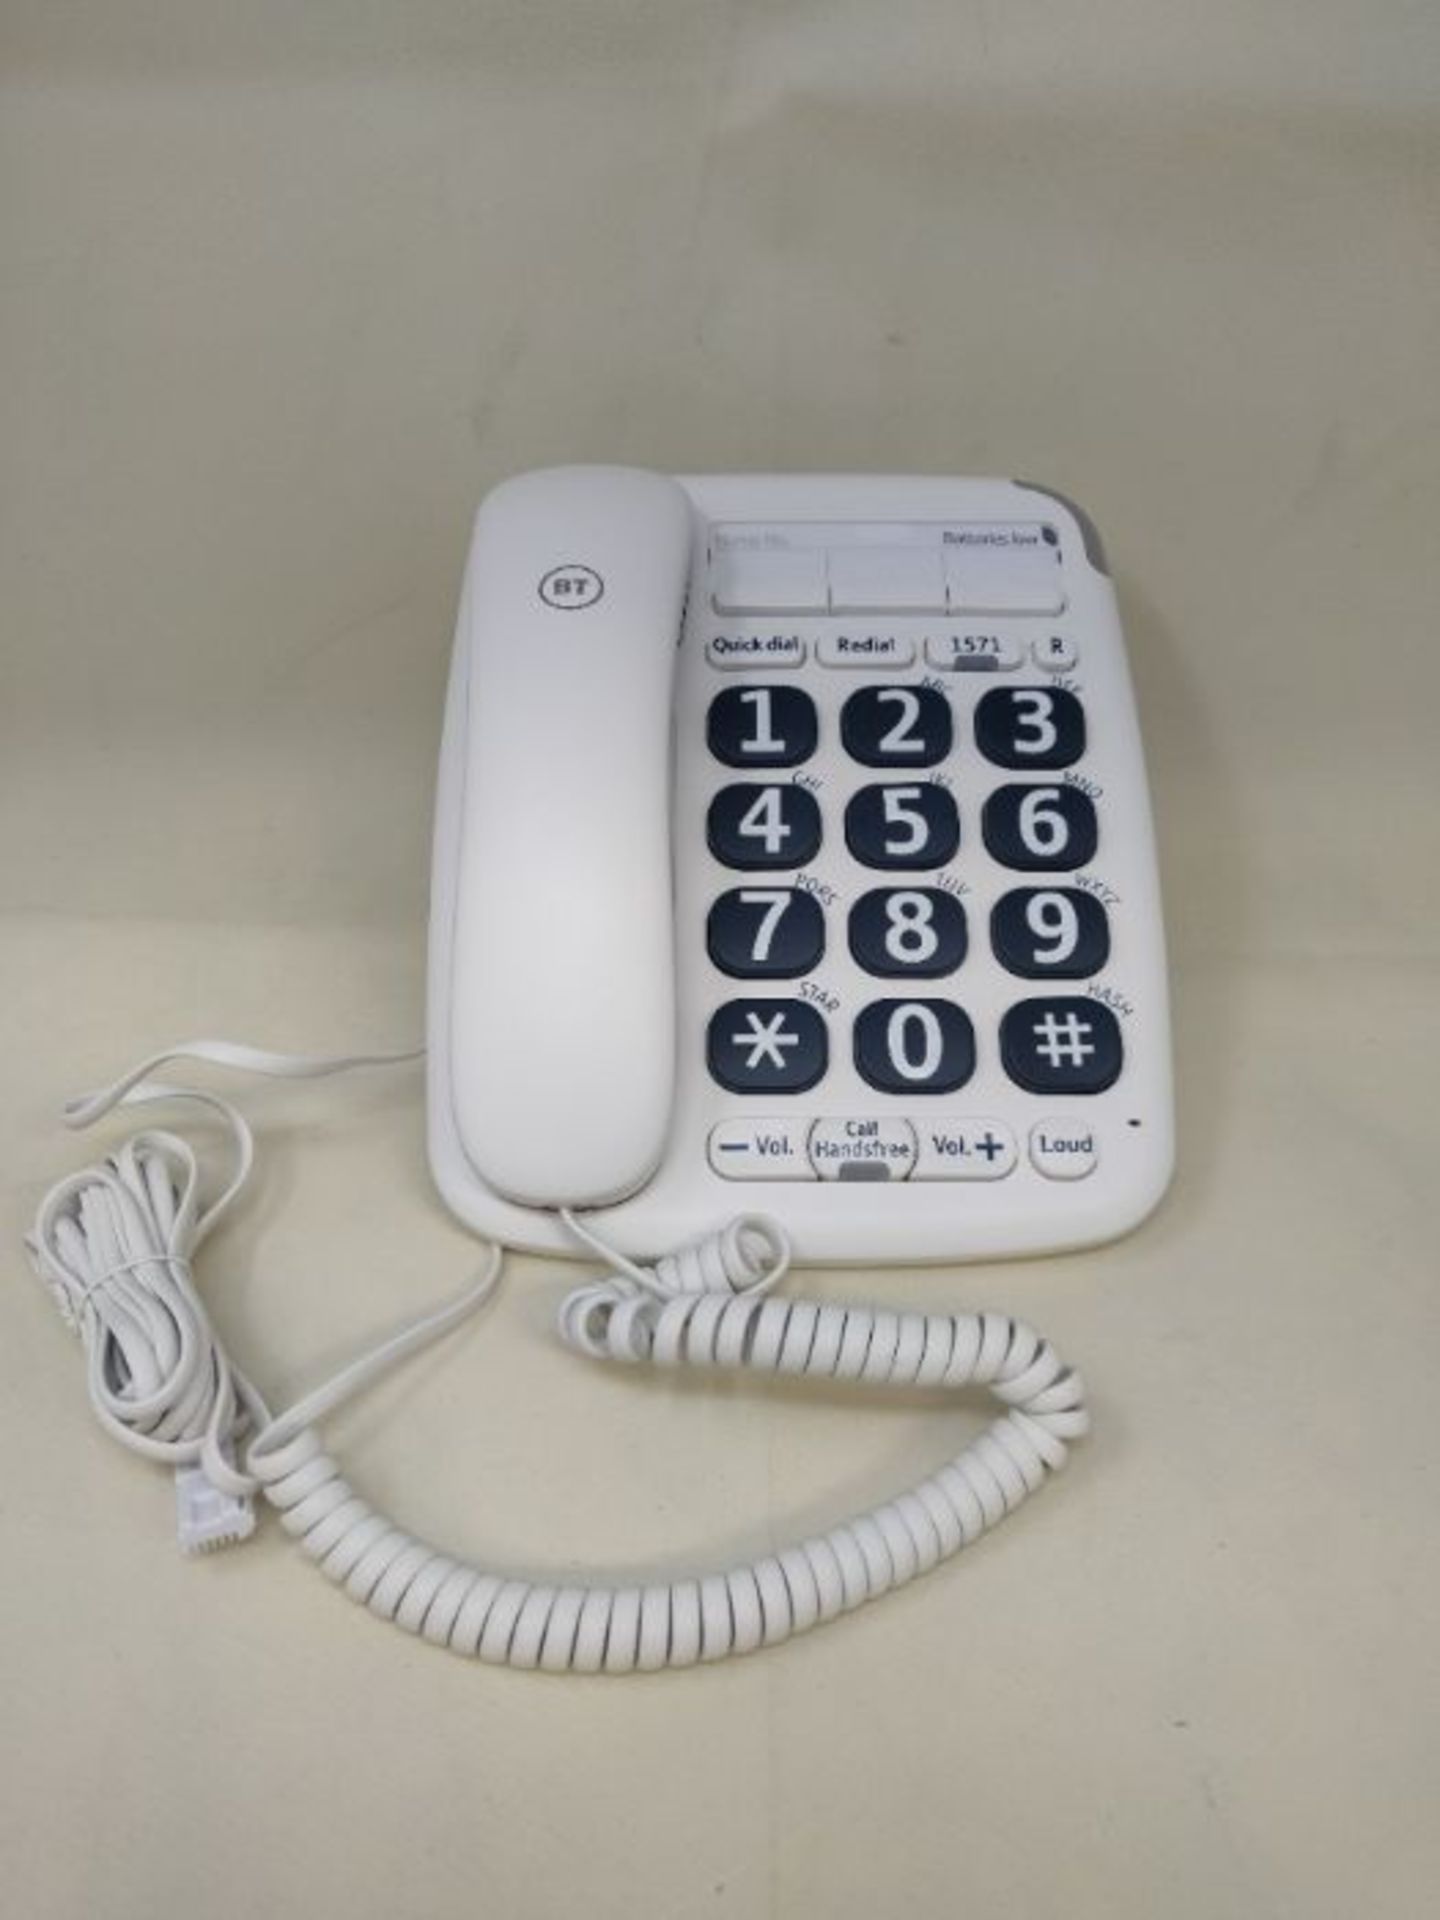 BT Big Button 200 Corded Telephone, White - Image 3 of 3